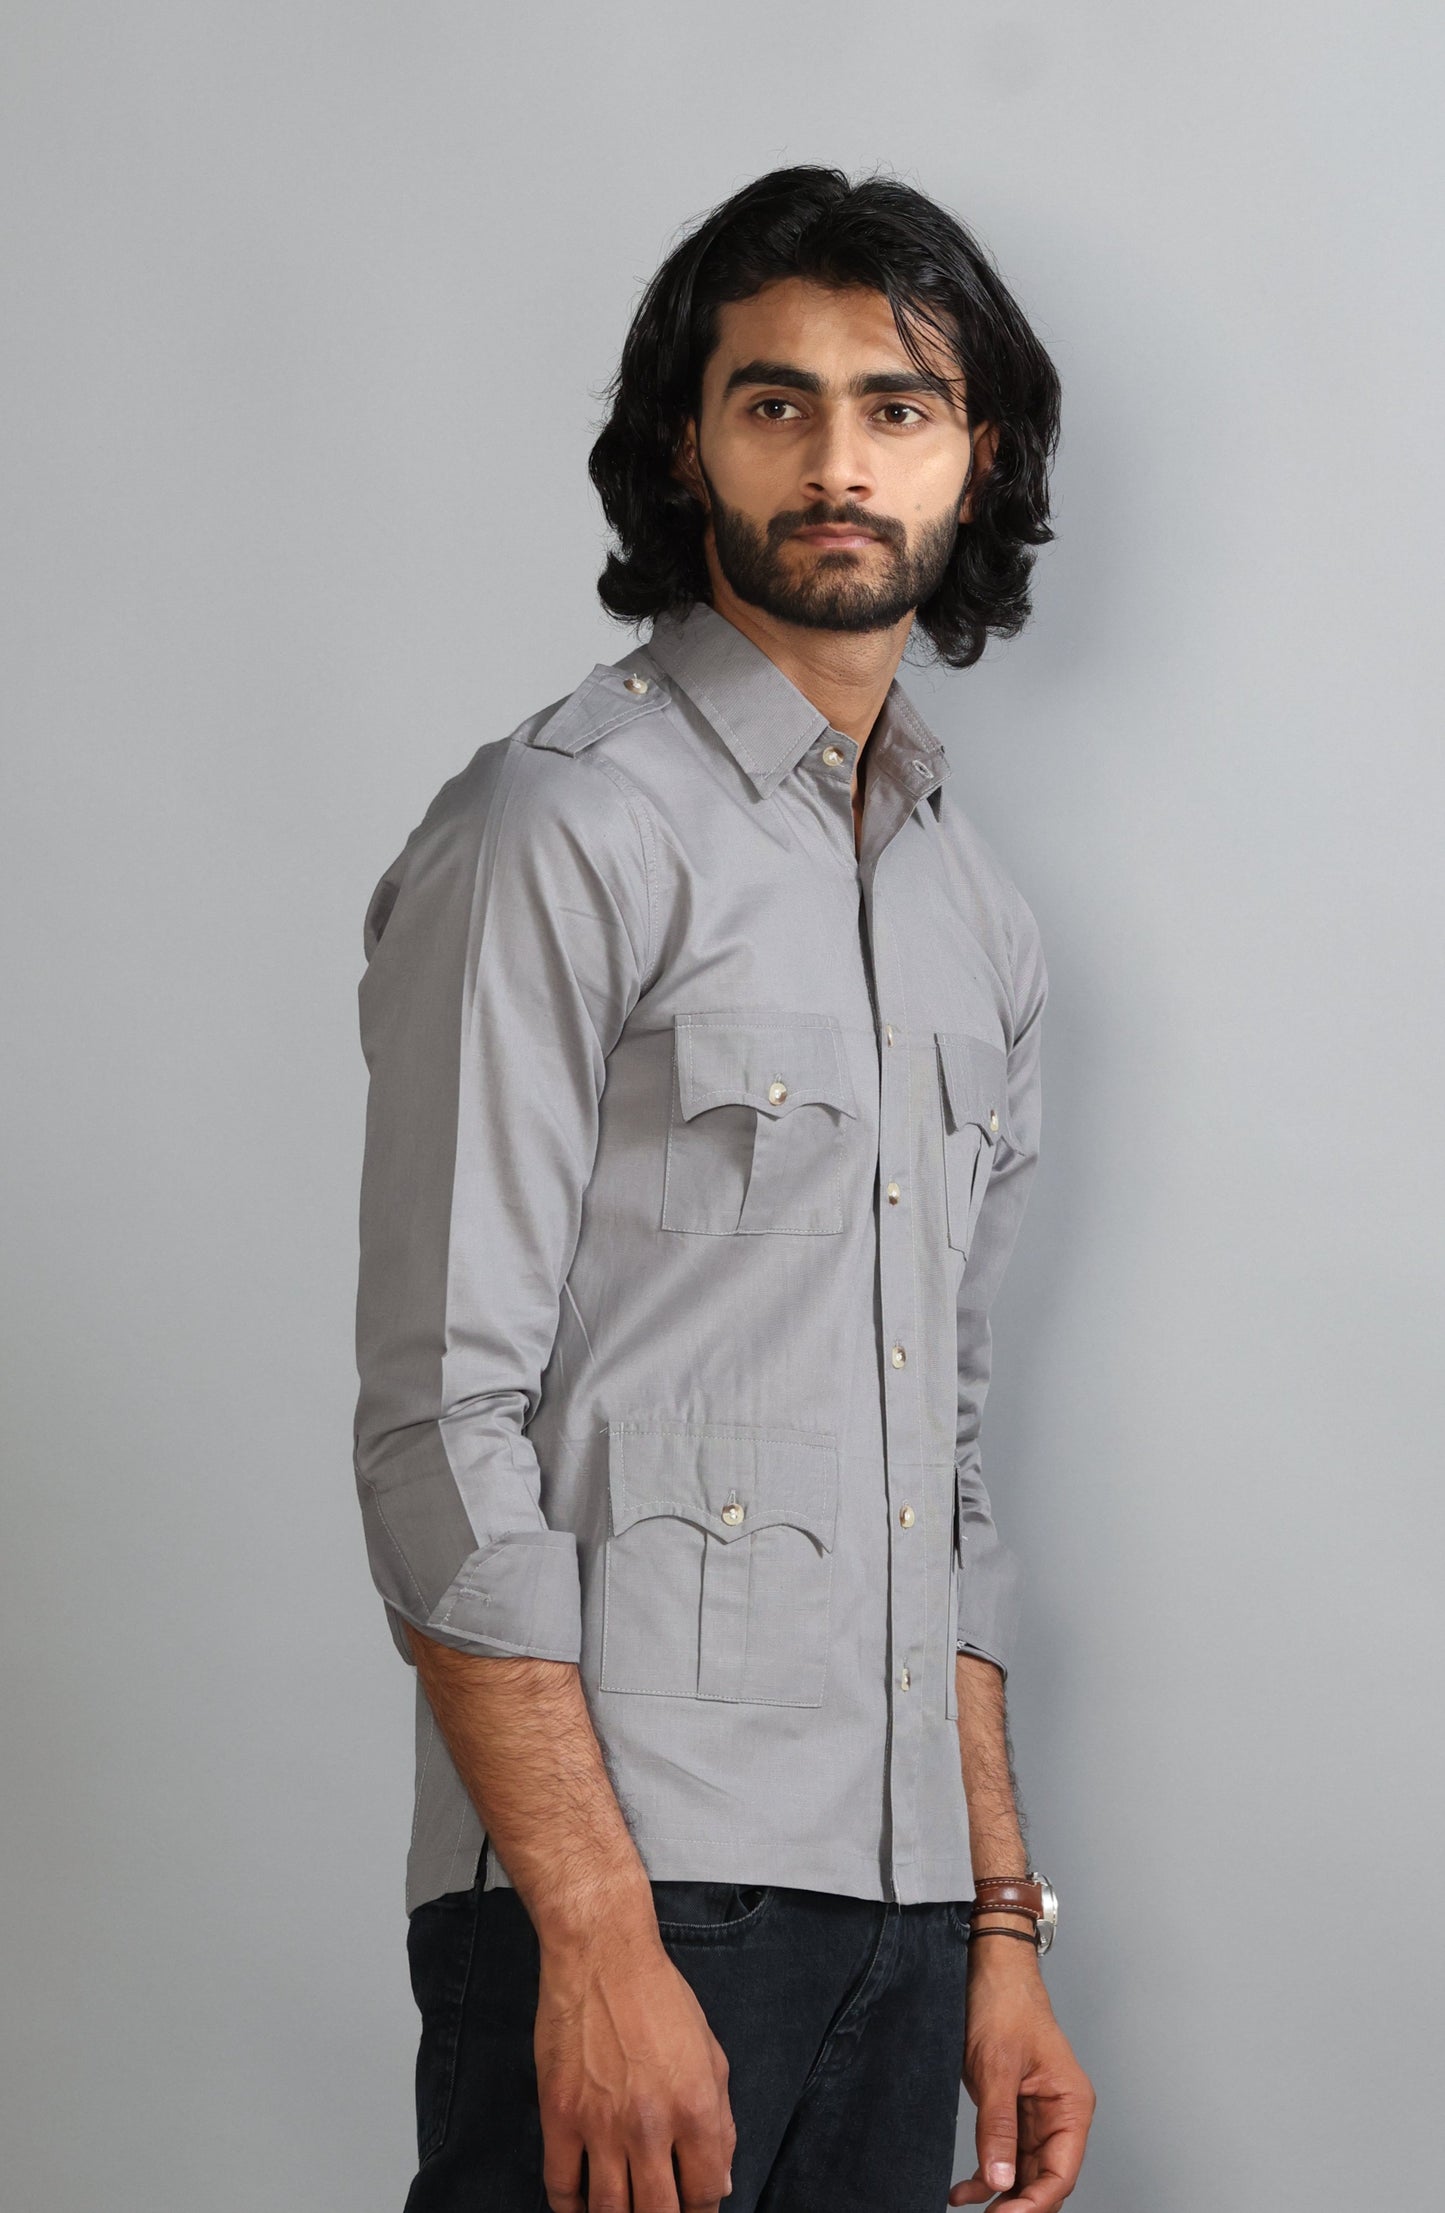 Fossil Grey Color Cotton Hunting Shirt